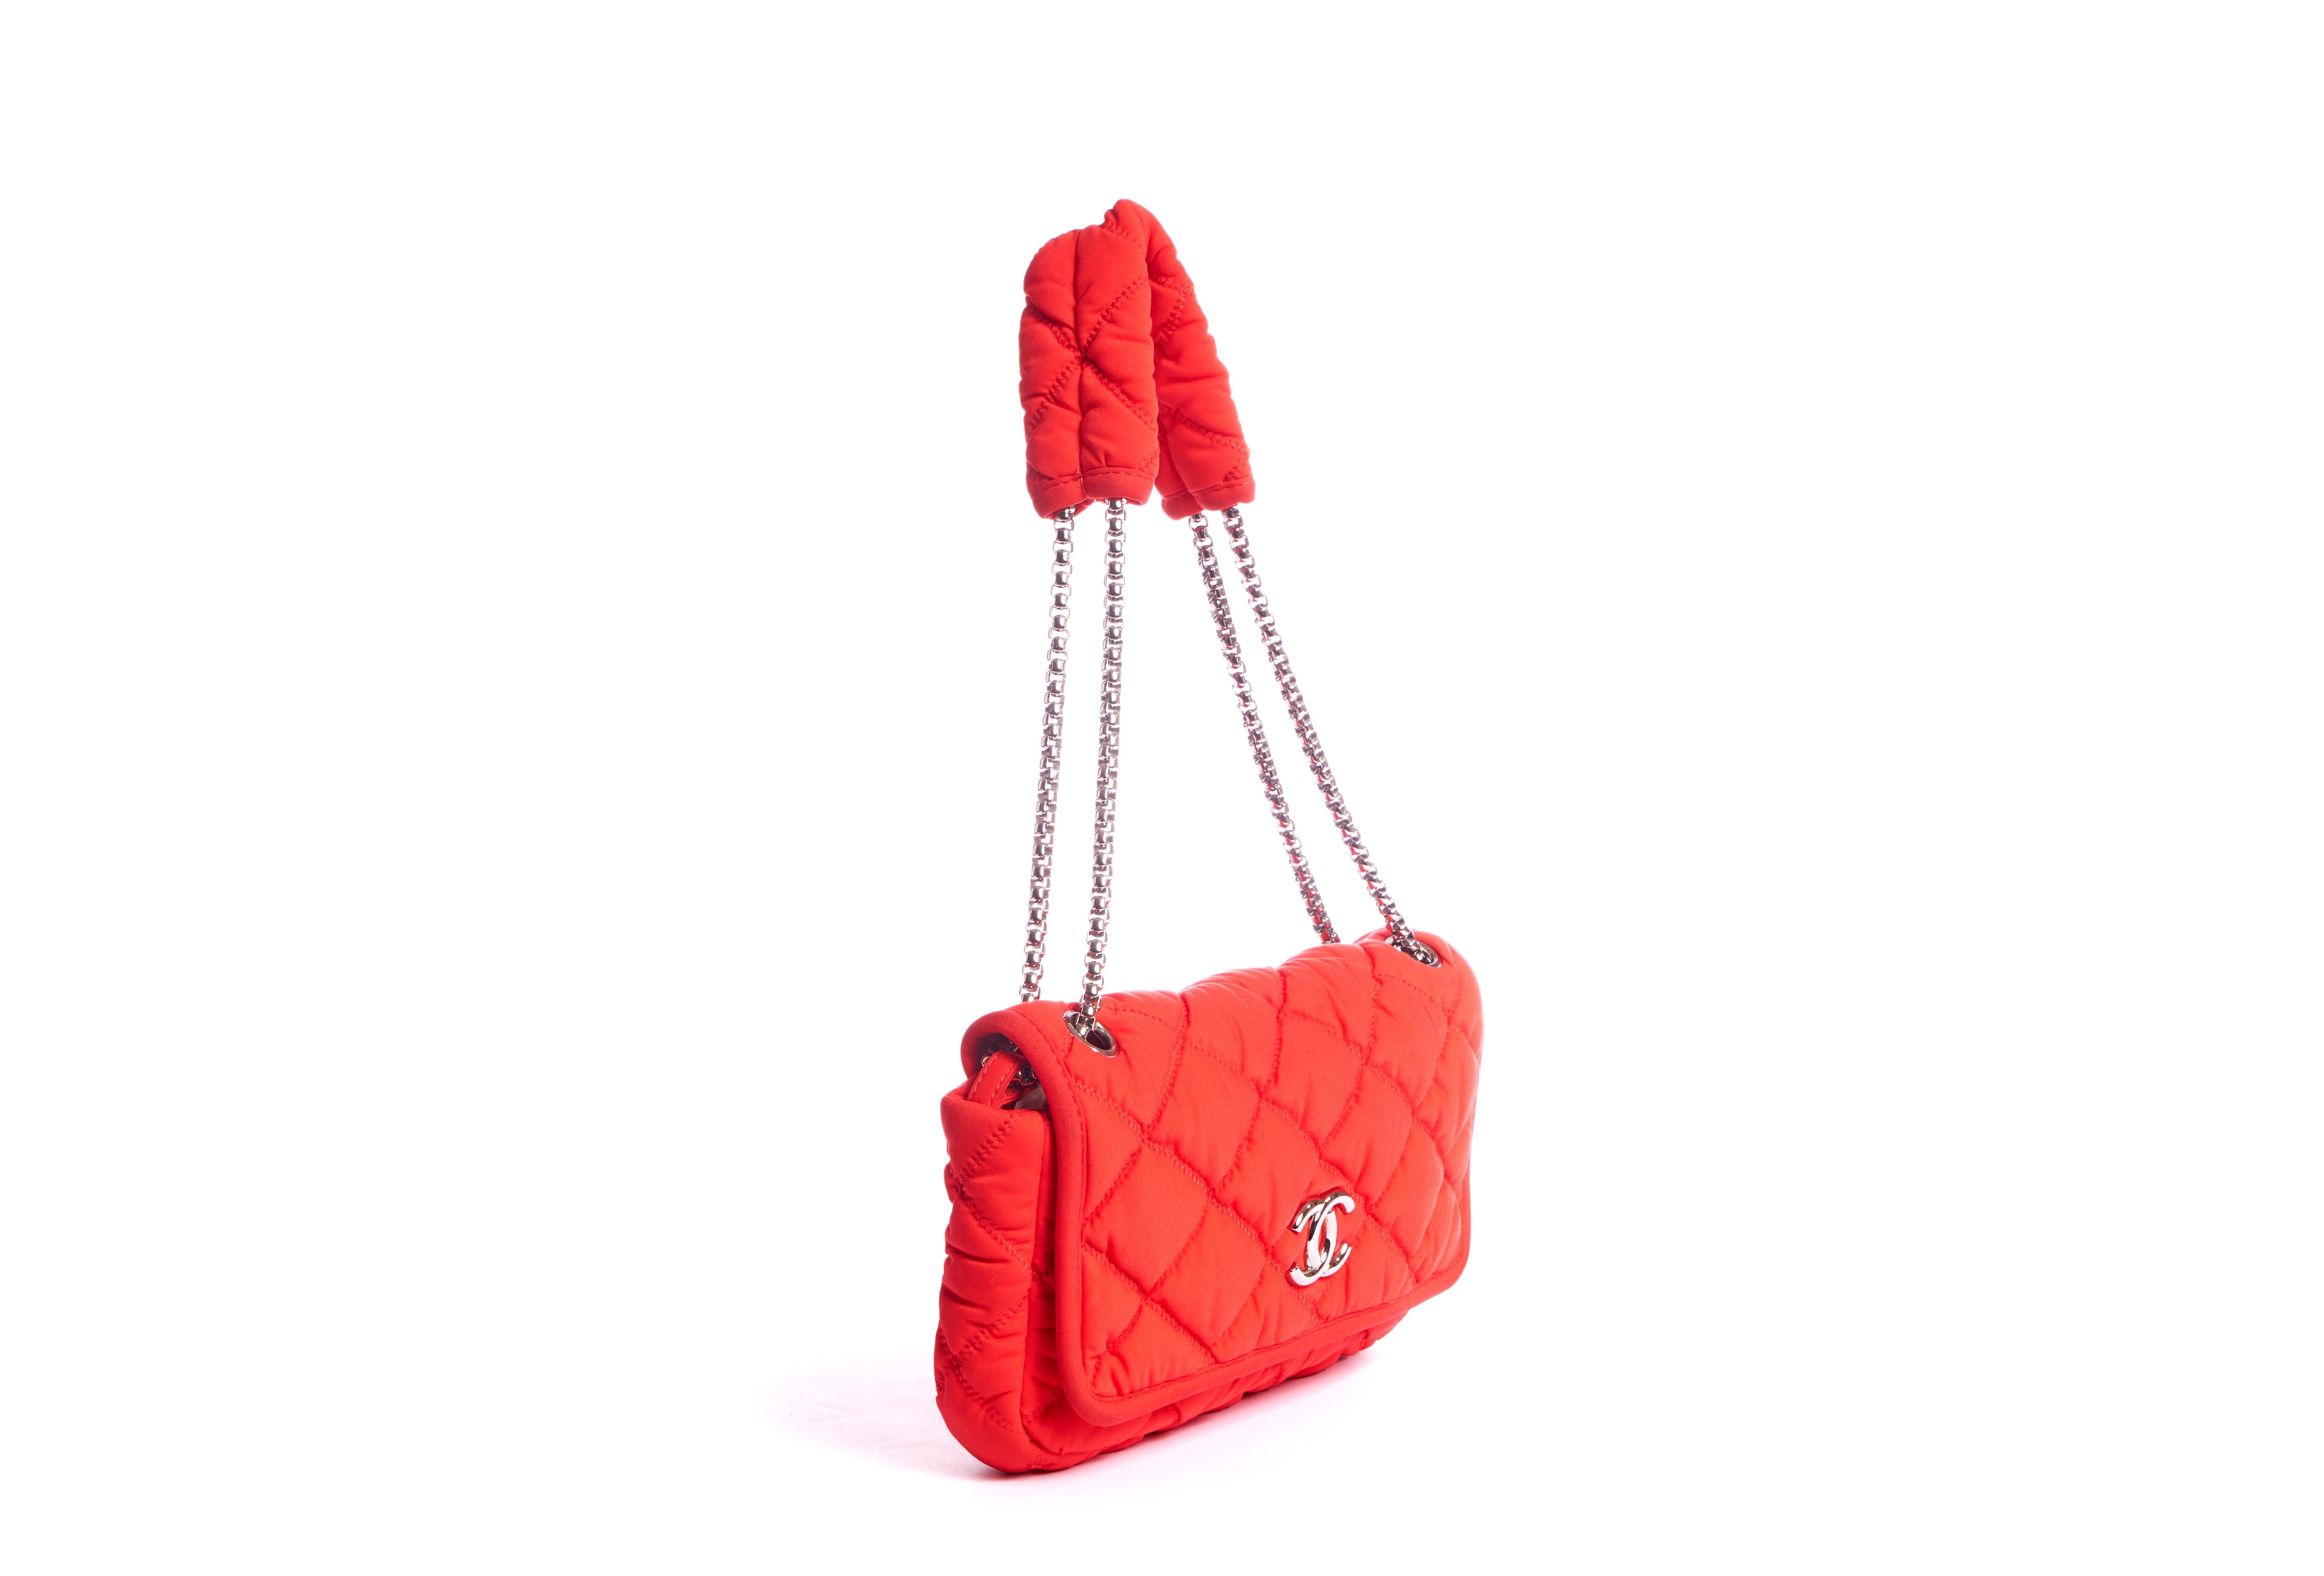 Chanel red nylon bubble bag with single flap and logo. Silver tone hardware. Shoulder drop 10.5